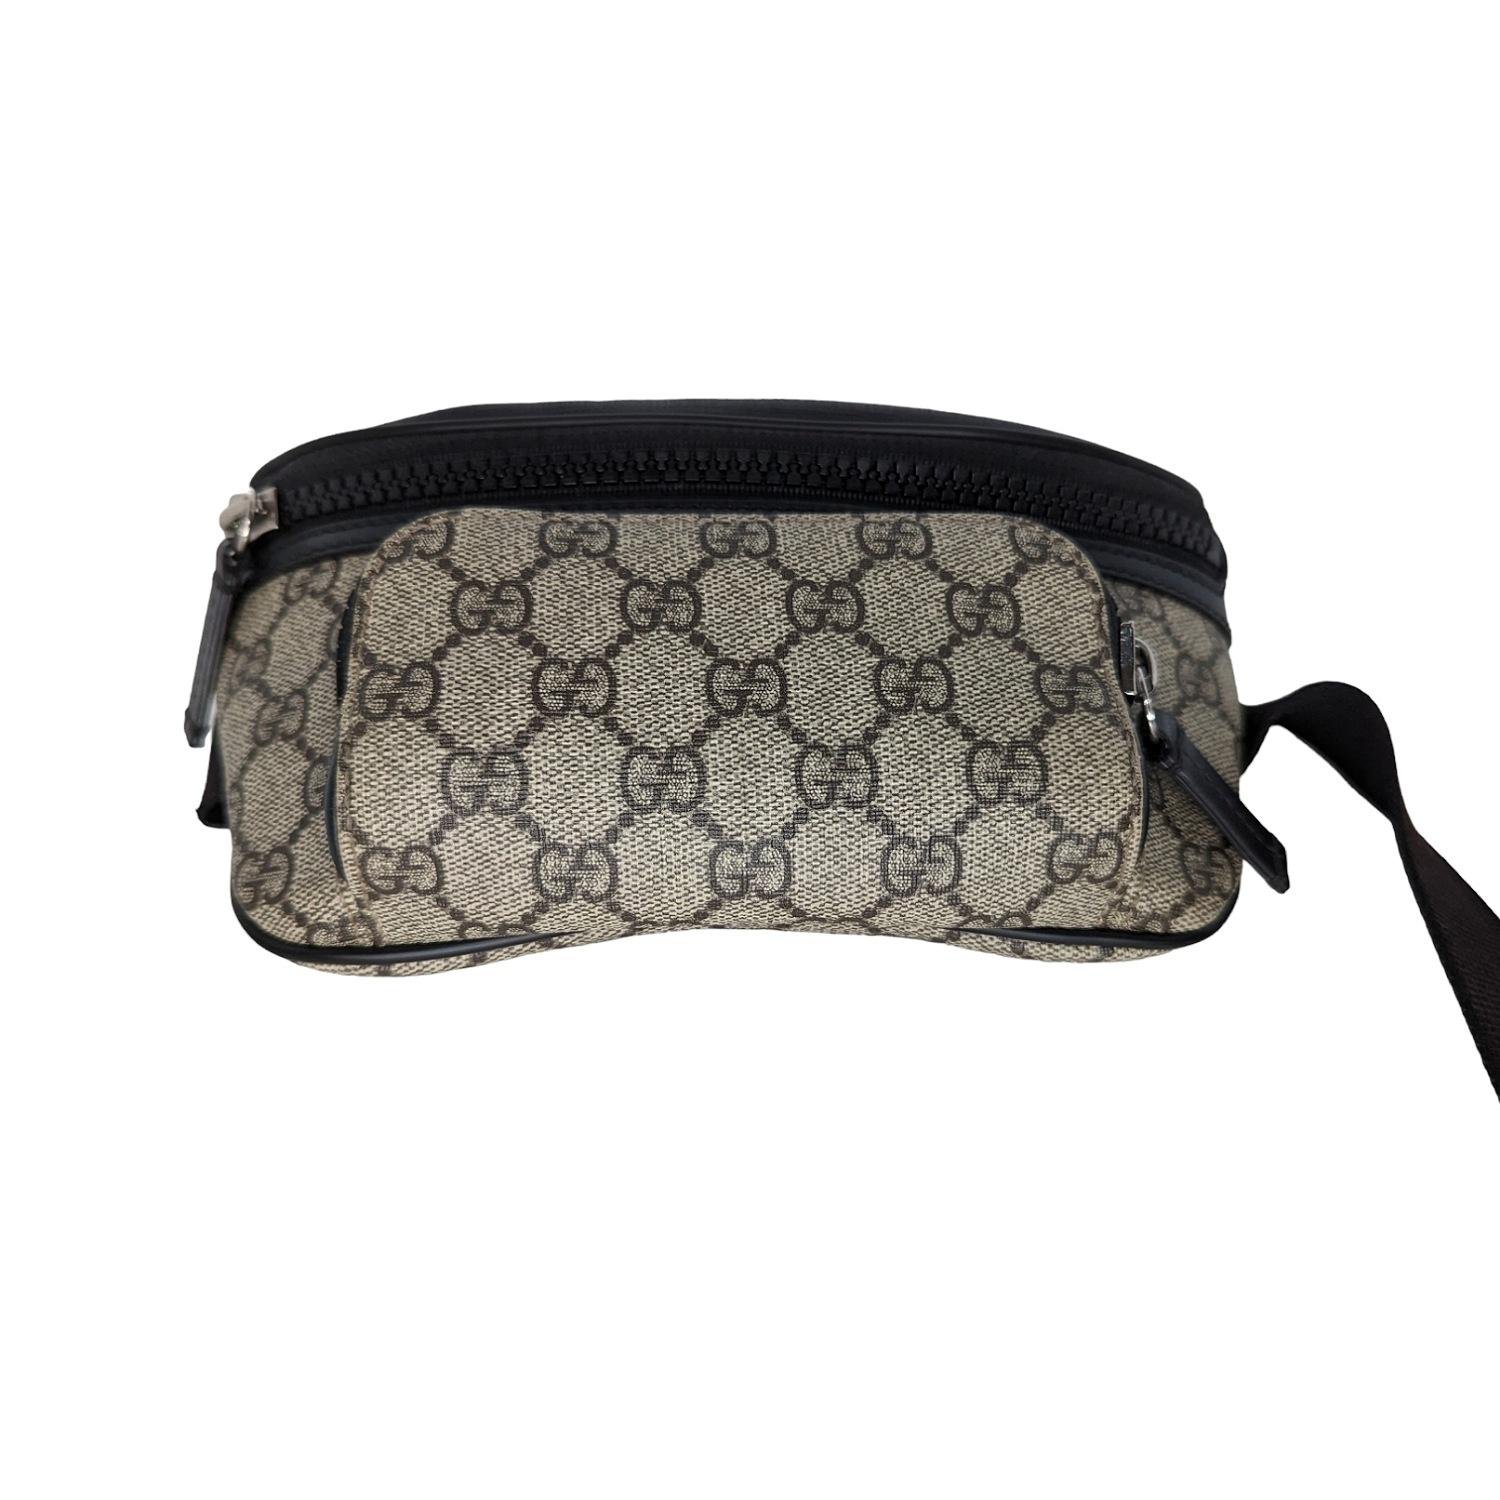 This chic belt bag is finely crafted of coated Gucci GG monogram coated canvas. The bag features a large frontal zipper pocket and a small exterior zipper pocket with an adjustable canvas belt strap with silver-tone hardware. The interior is a dark